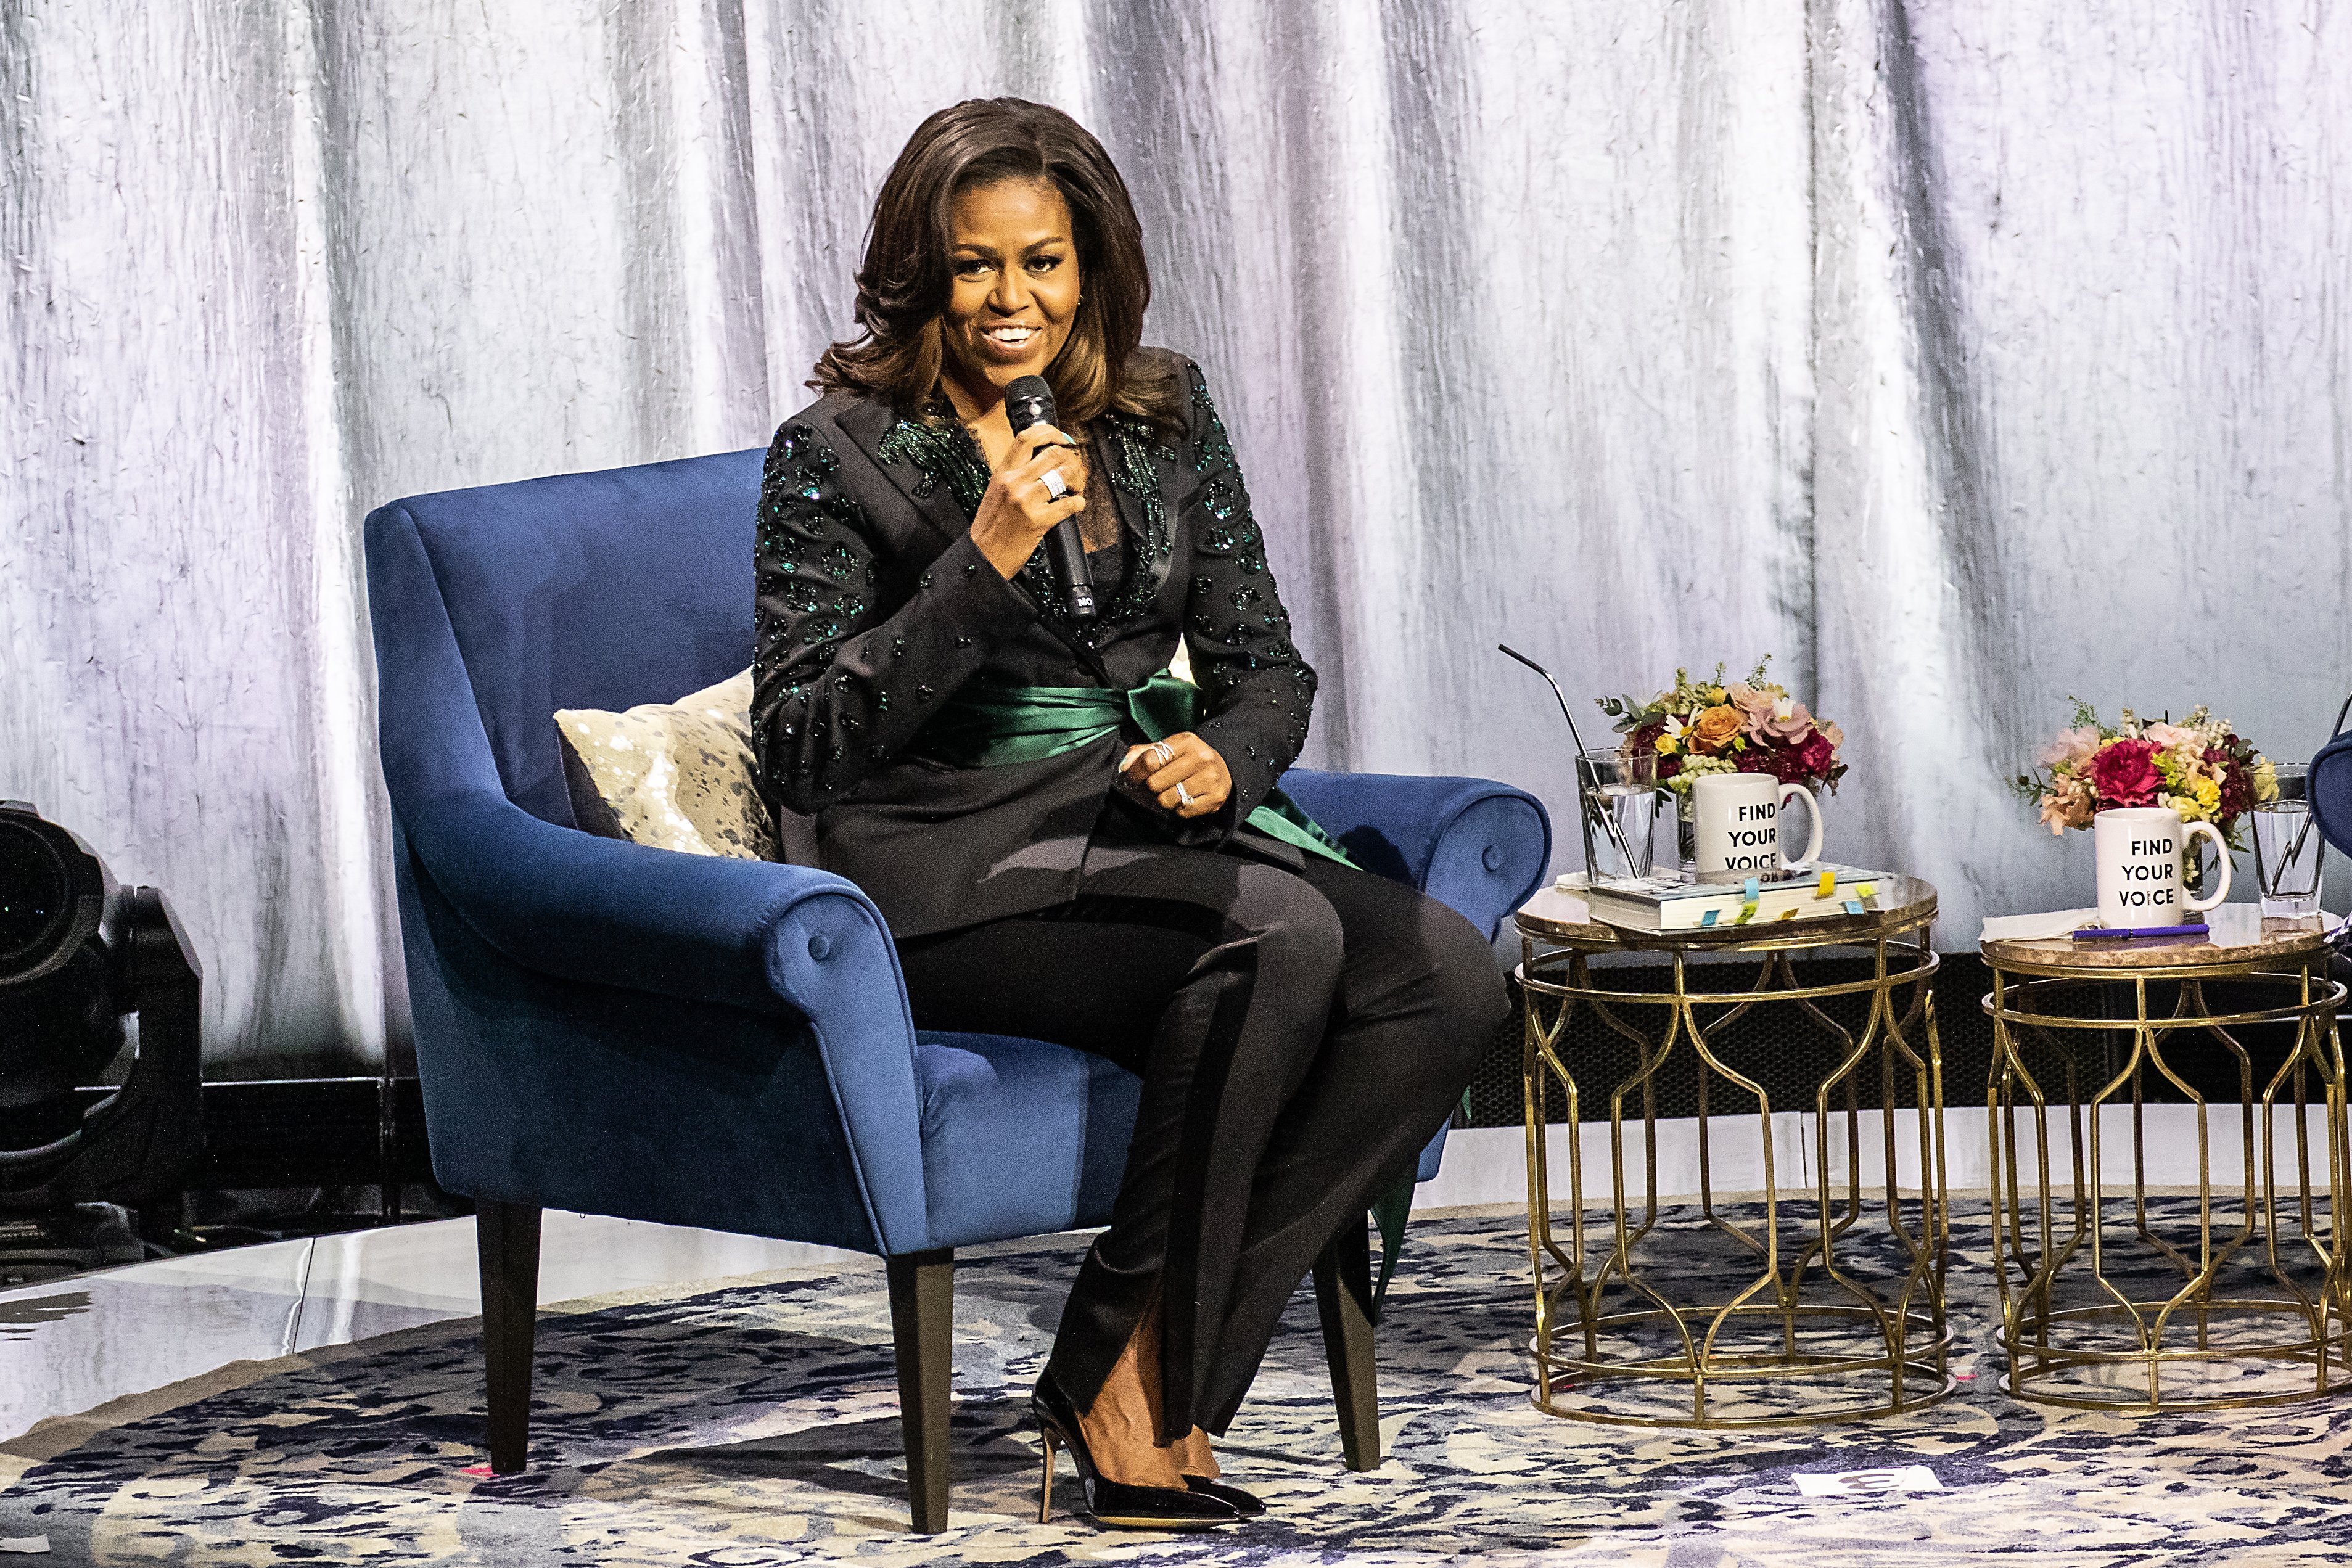 Michelle Obama held a conversation with Phoebe Robinson about her book "Becoming" at Oslo Spektrum on April 11, 2019 in Oslo, Norway | Photo: Getty Images